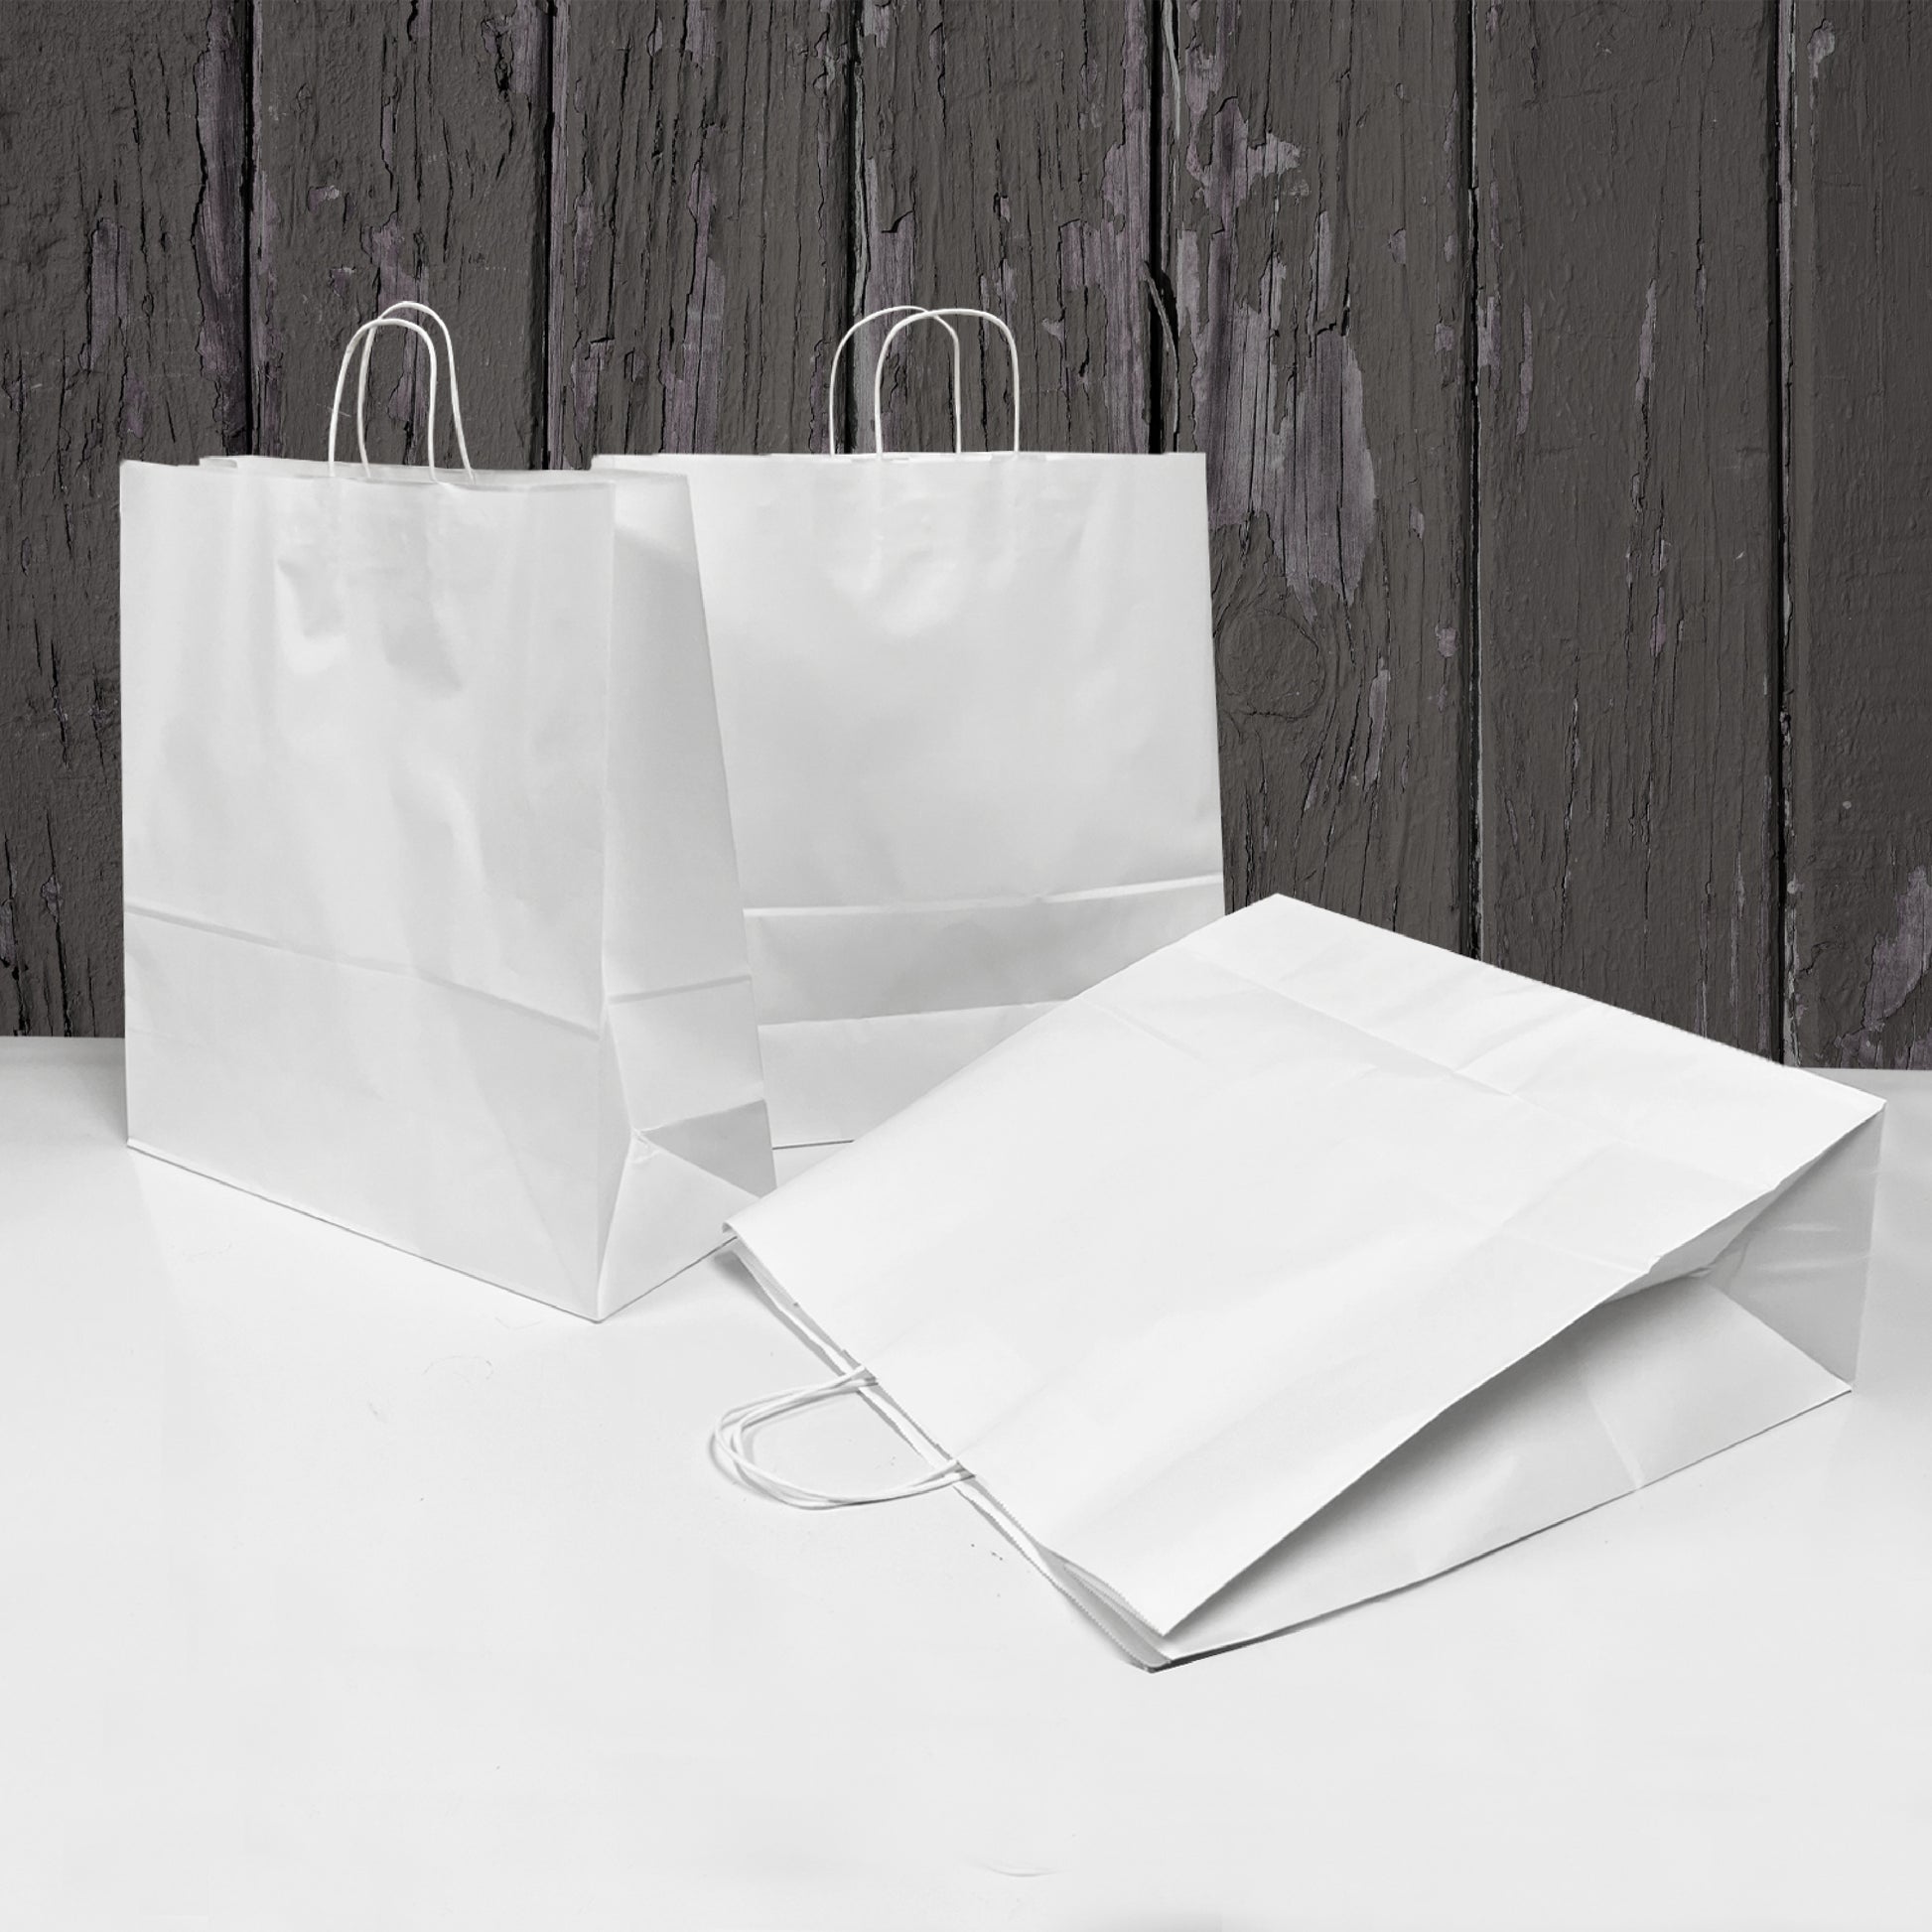 200 Pcs, Jumbo,  18x7x18.75 inches, White Paper Bags, with Twisted Handle